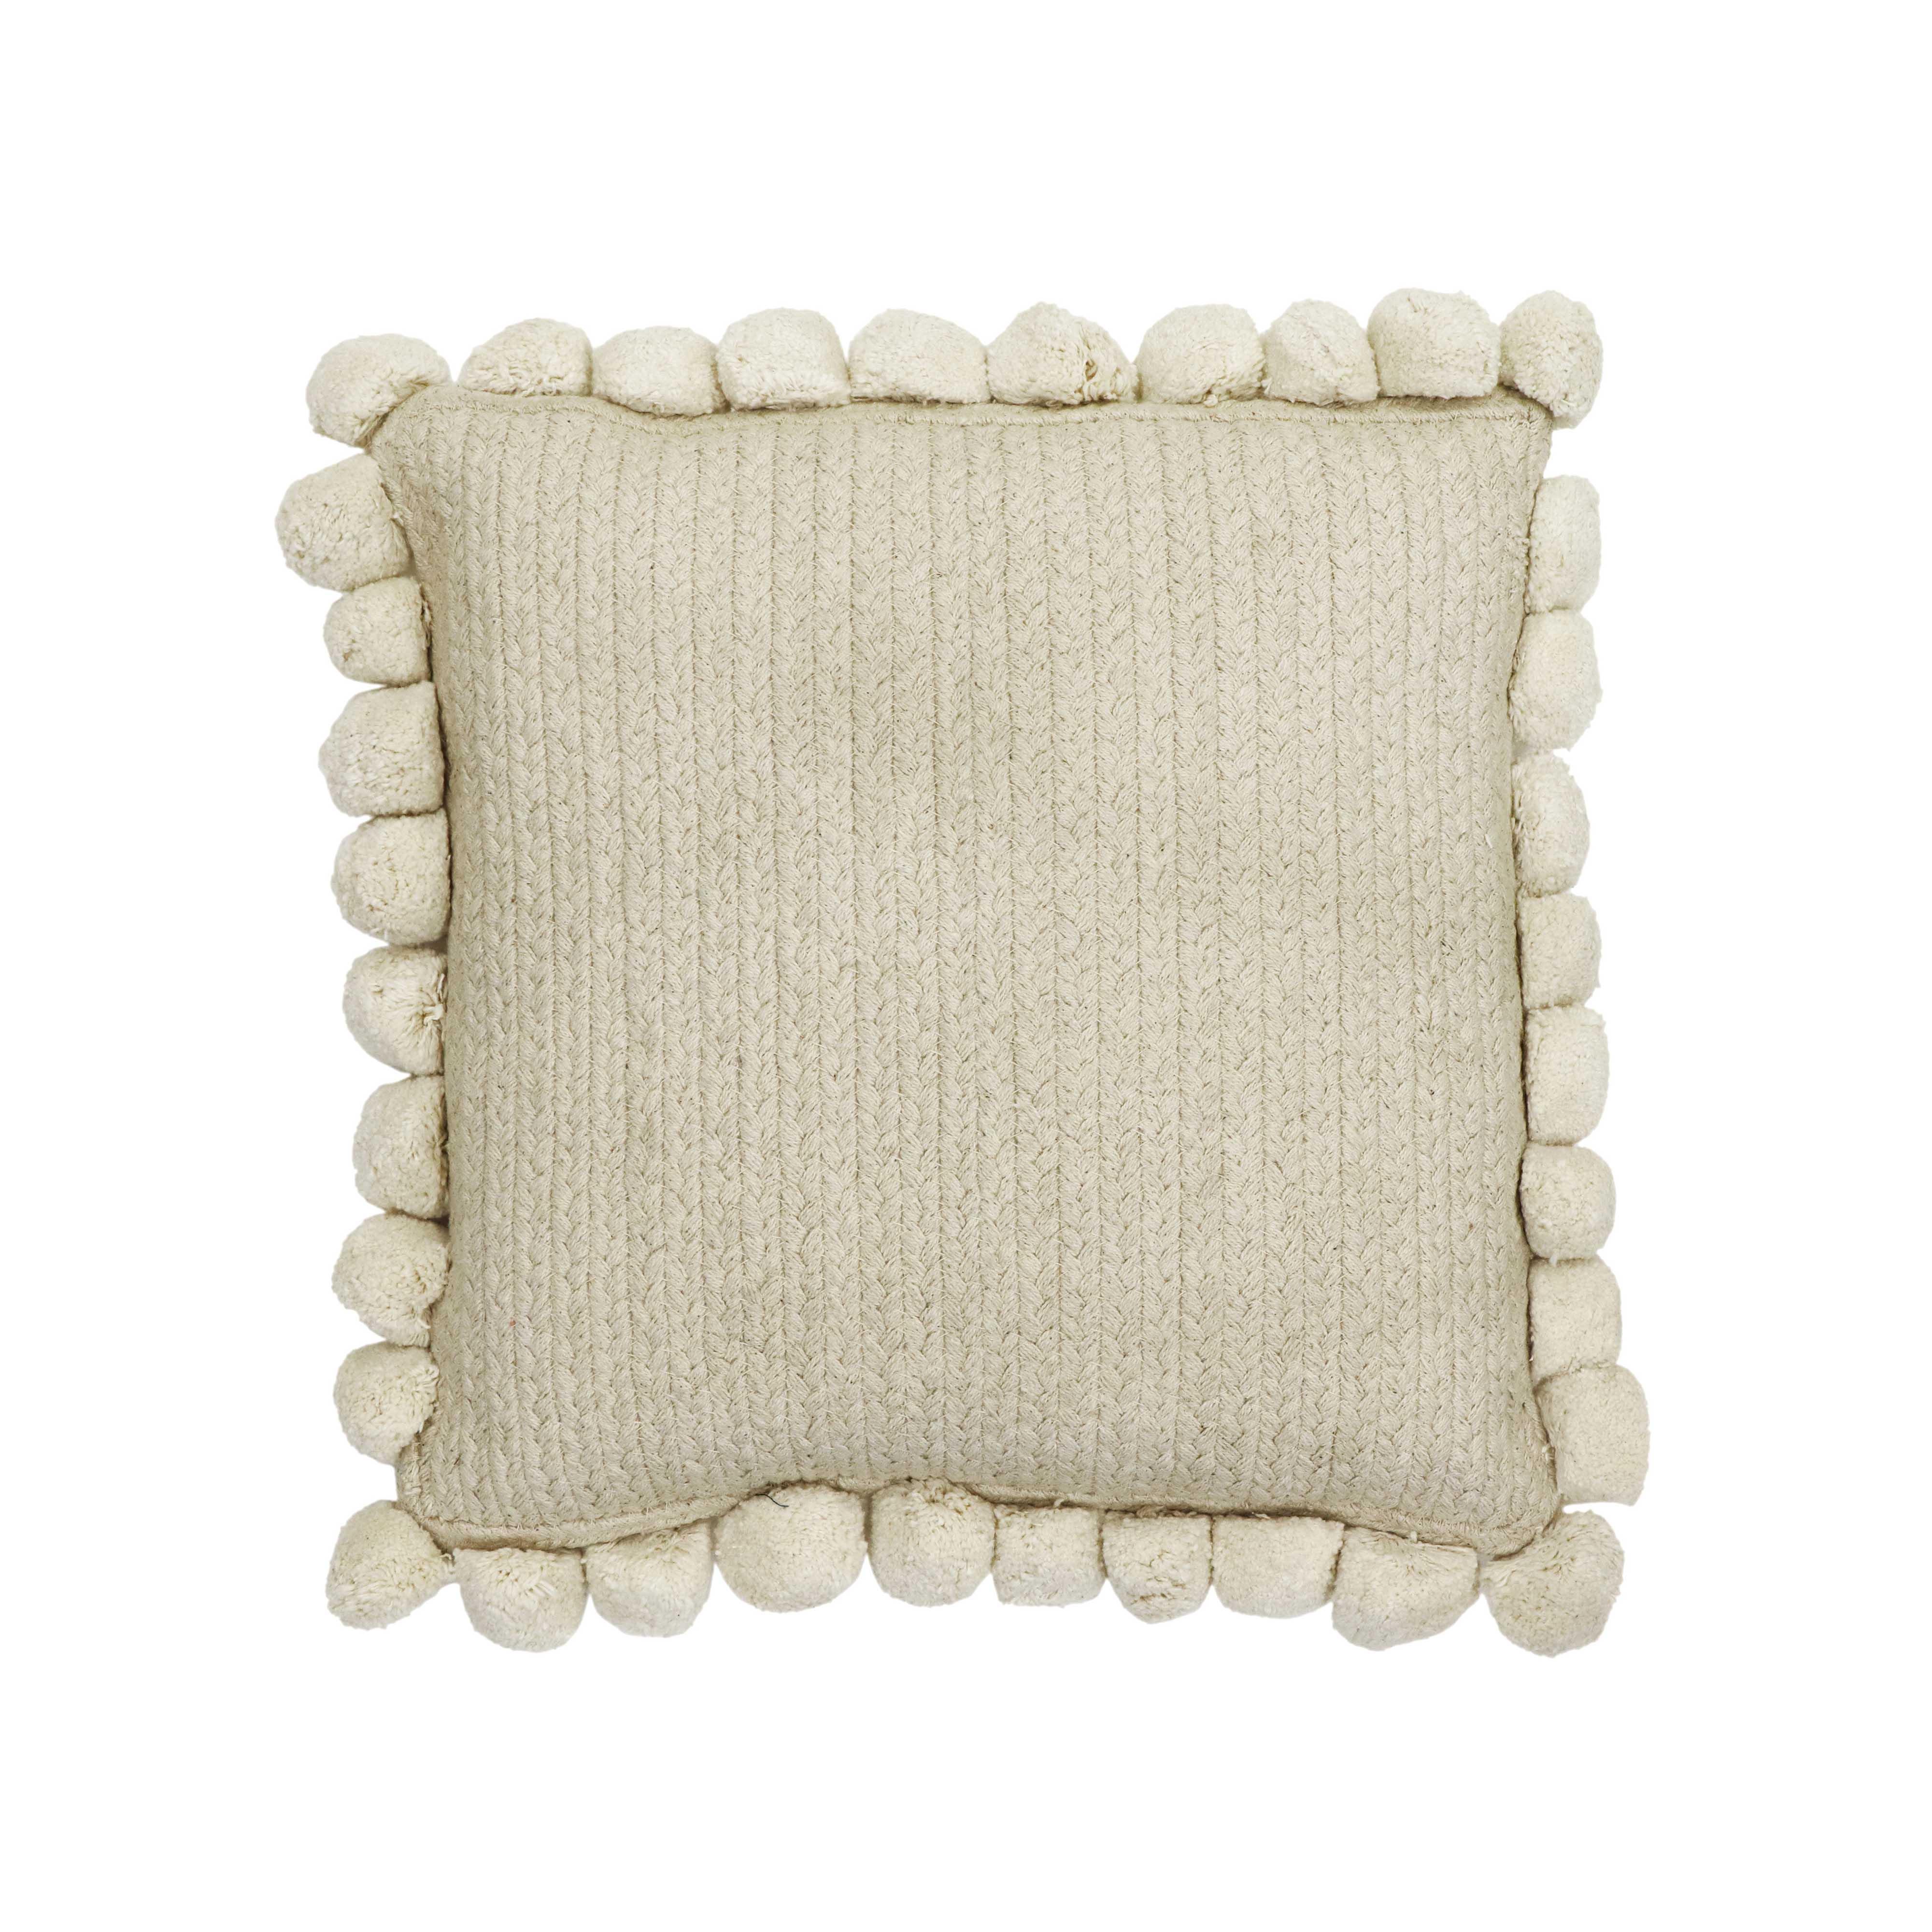 Tov Furniture Pillows - Adelyn Square Accent Pillow